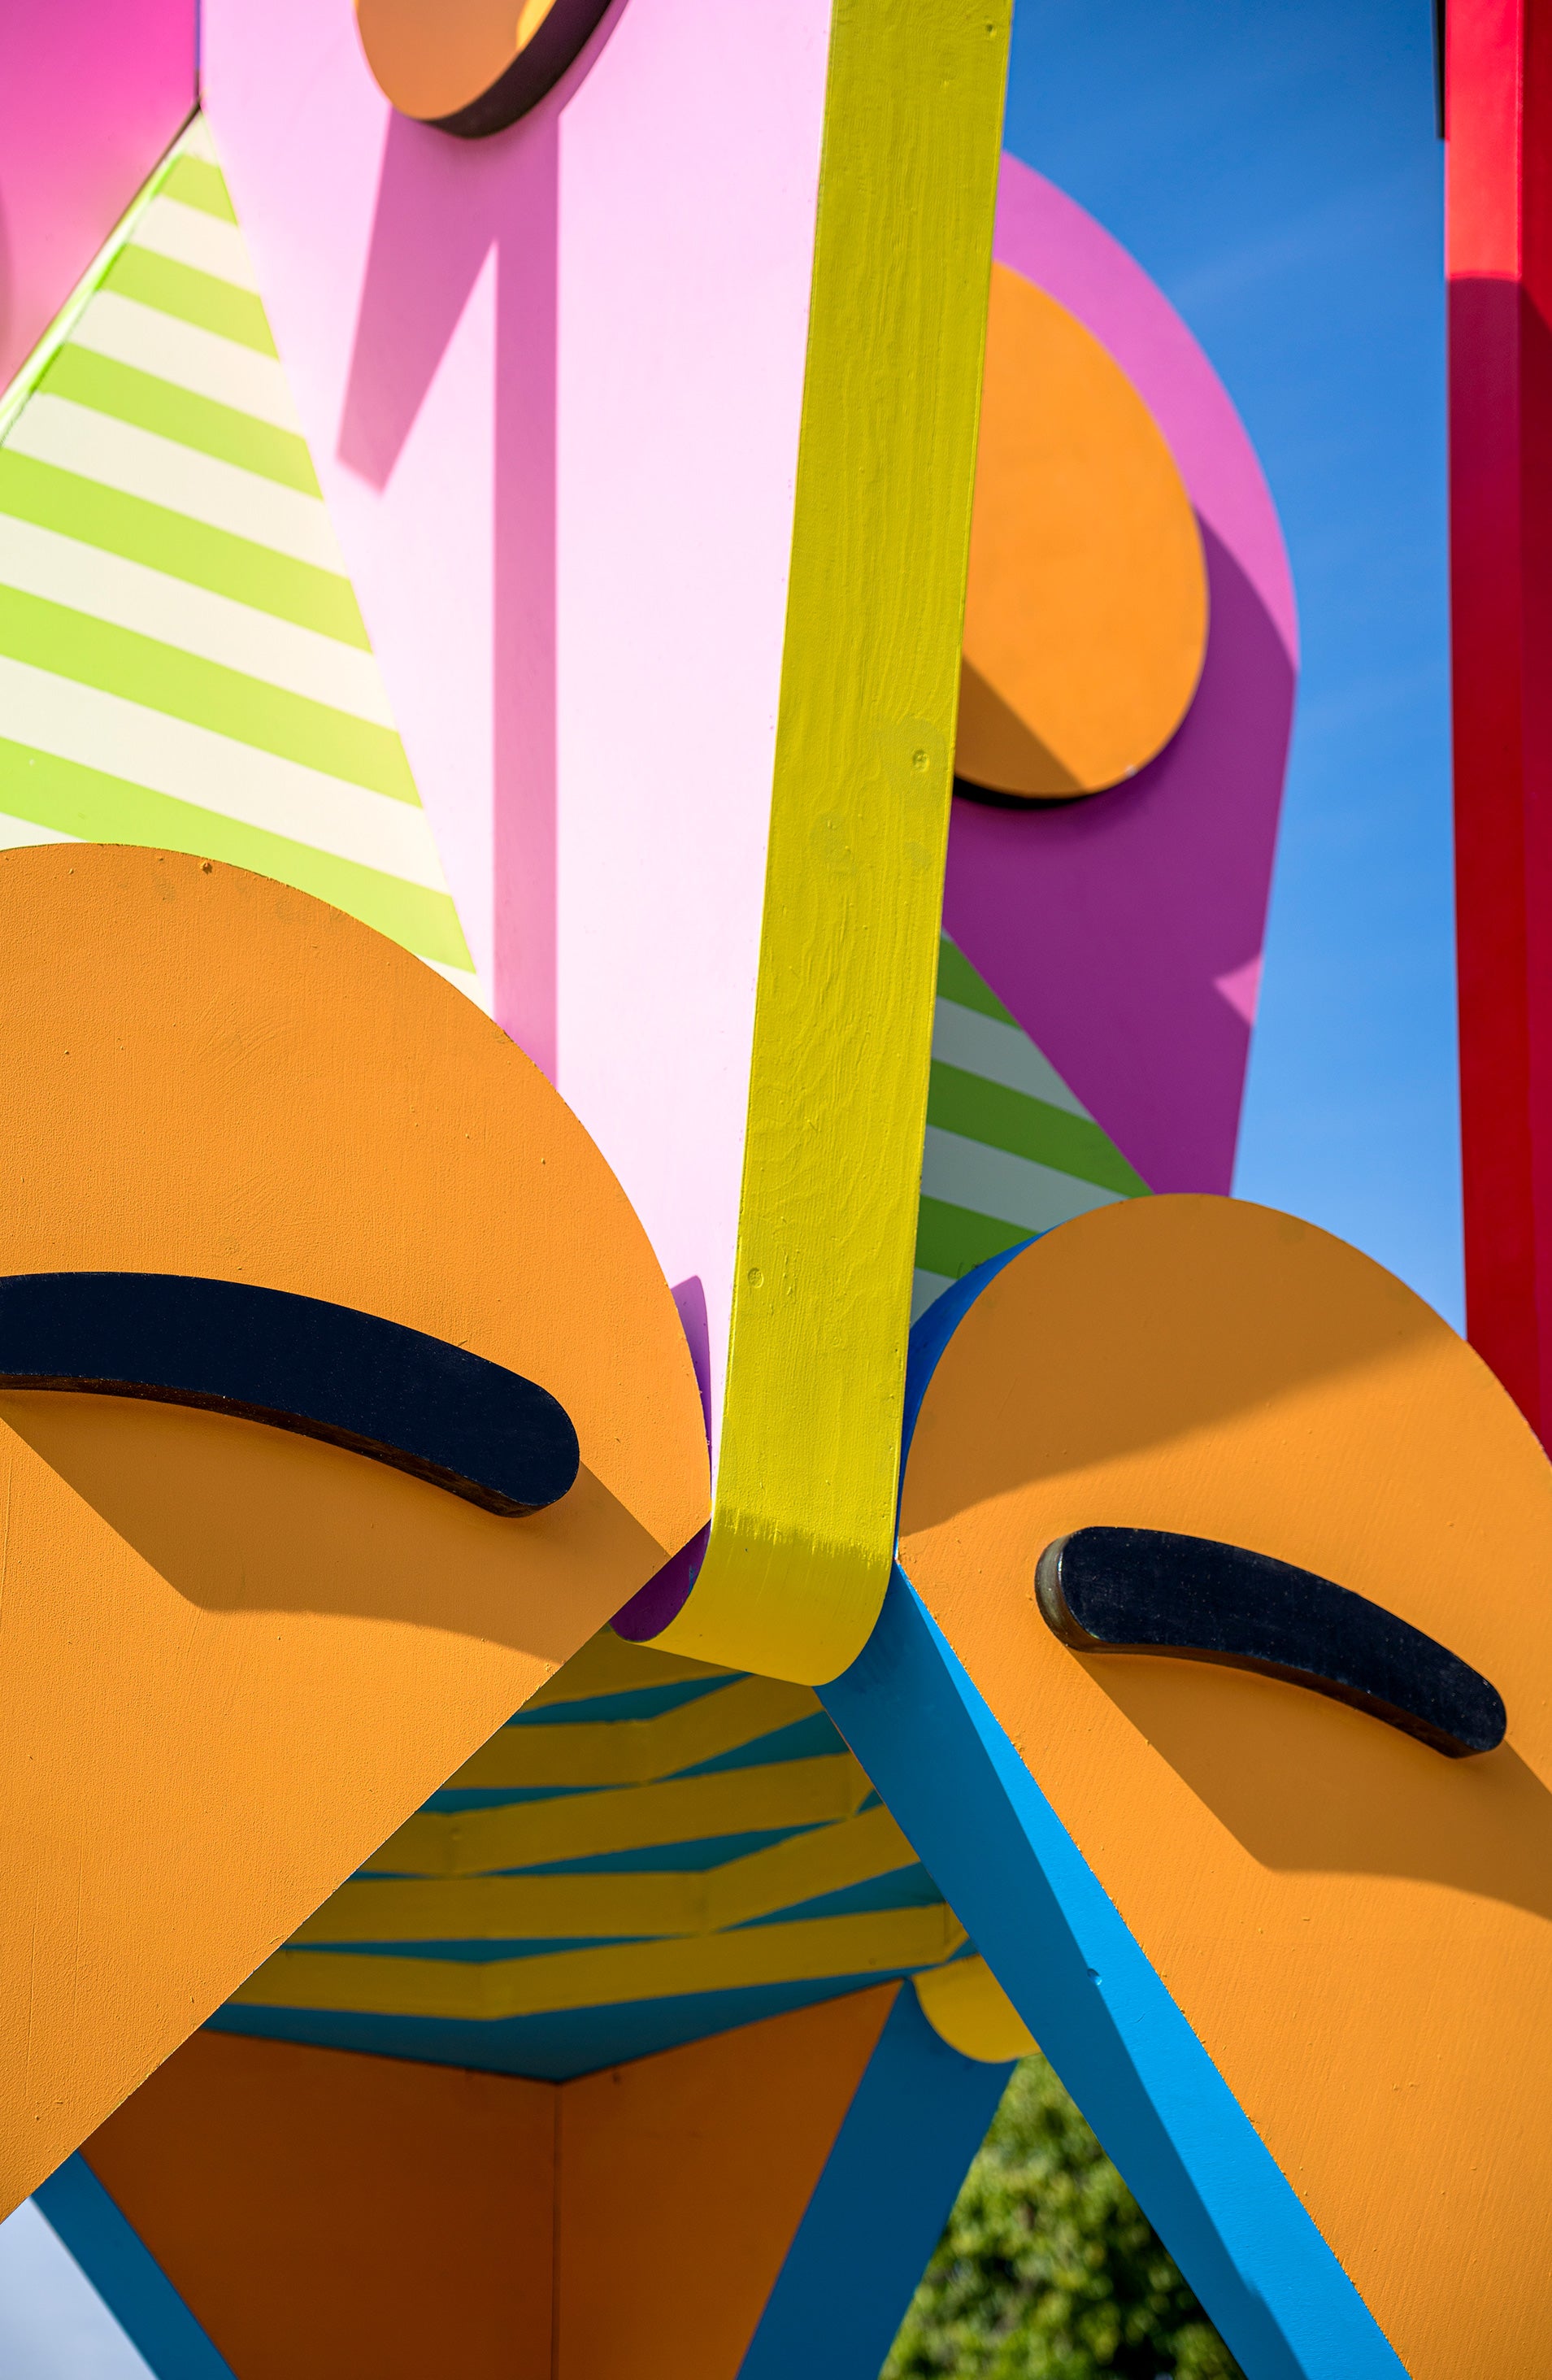 Babs Baldachino by Adam Nathaniel Furman for Fierce at the Commonwealth Games 2022